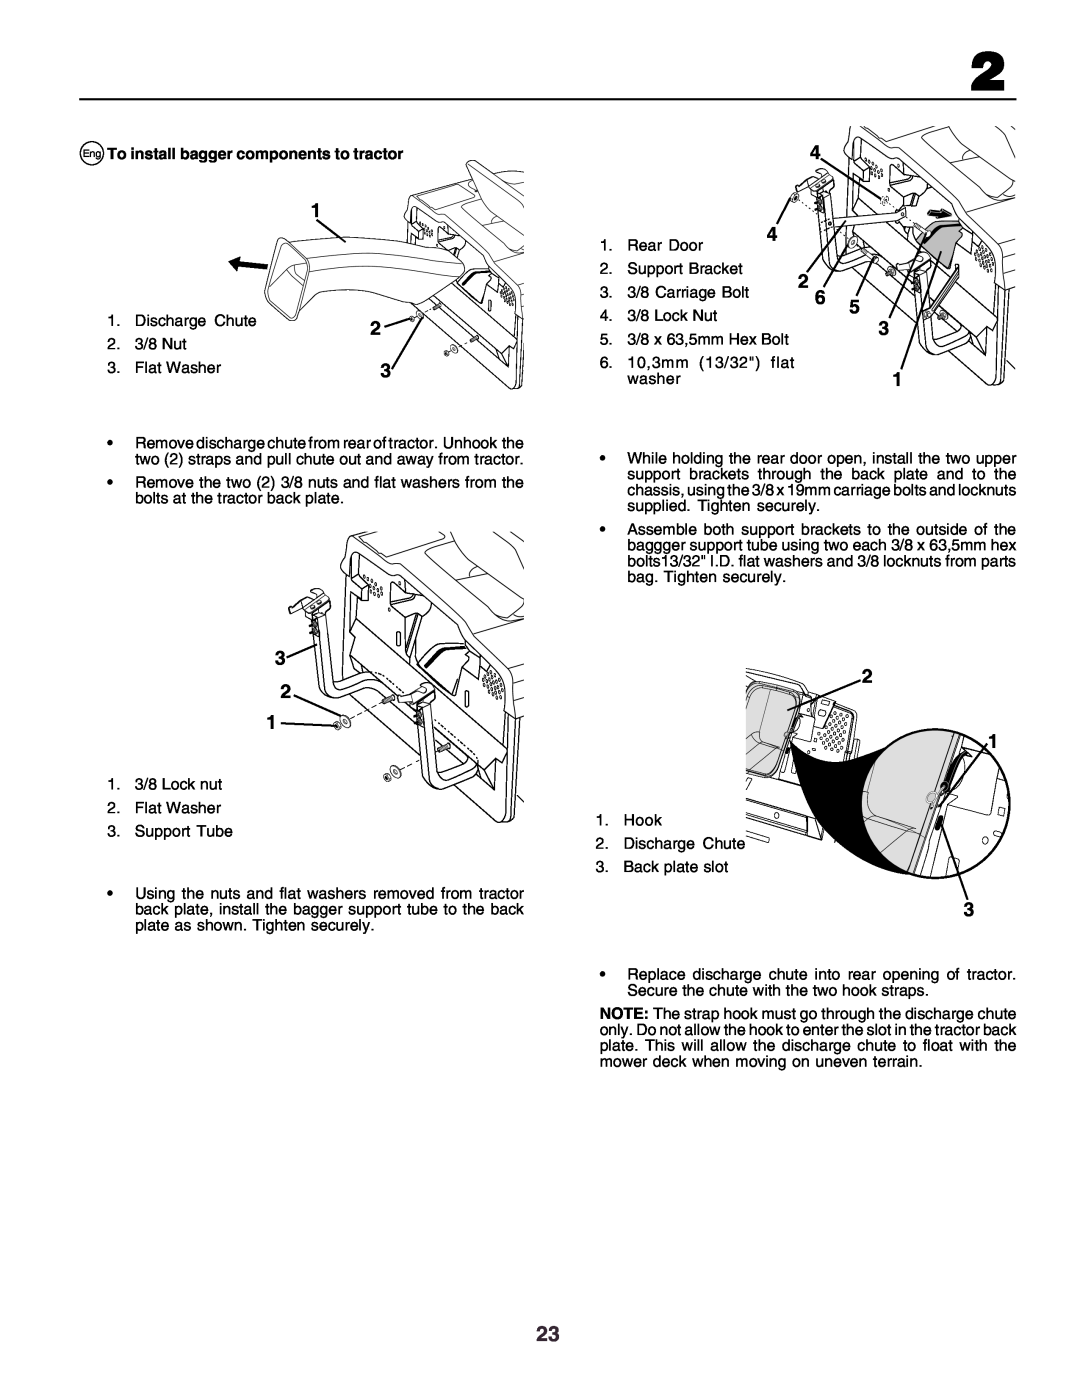 Husqvarna CT160 instruction manual 3 2, Eng To install bagger components to tractor 